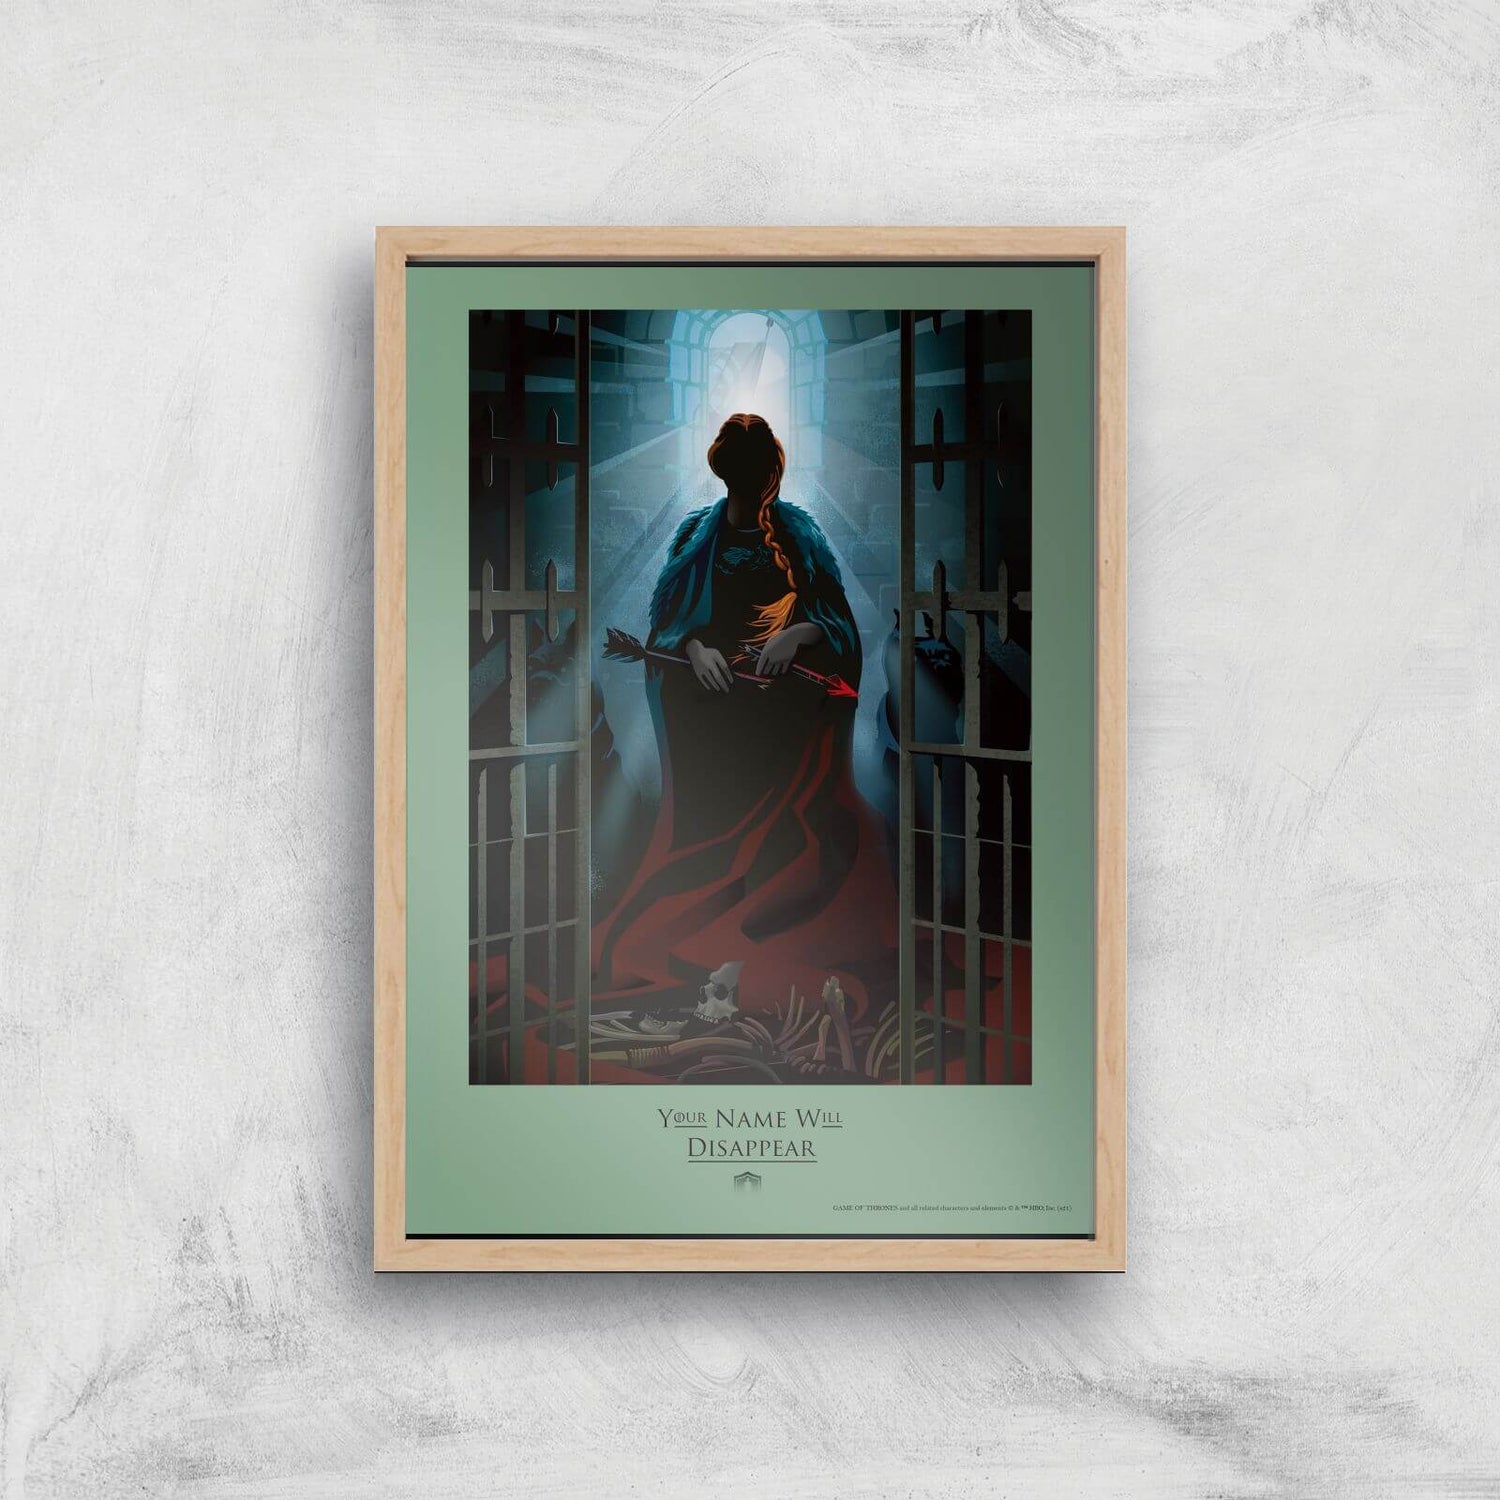 Game of Thrones Disappear Giclee Art Print - A4 - Wooden Frame